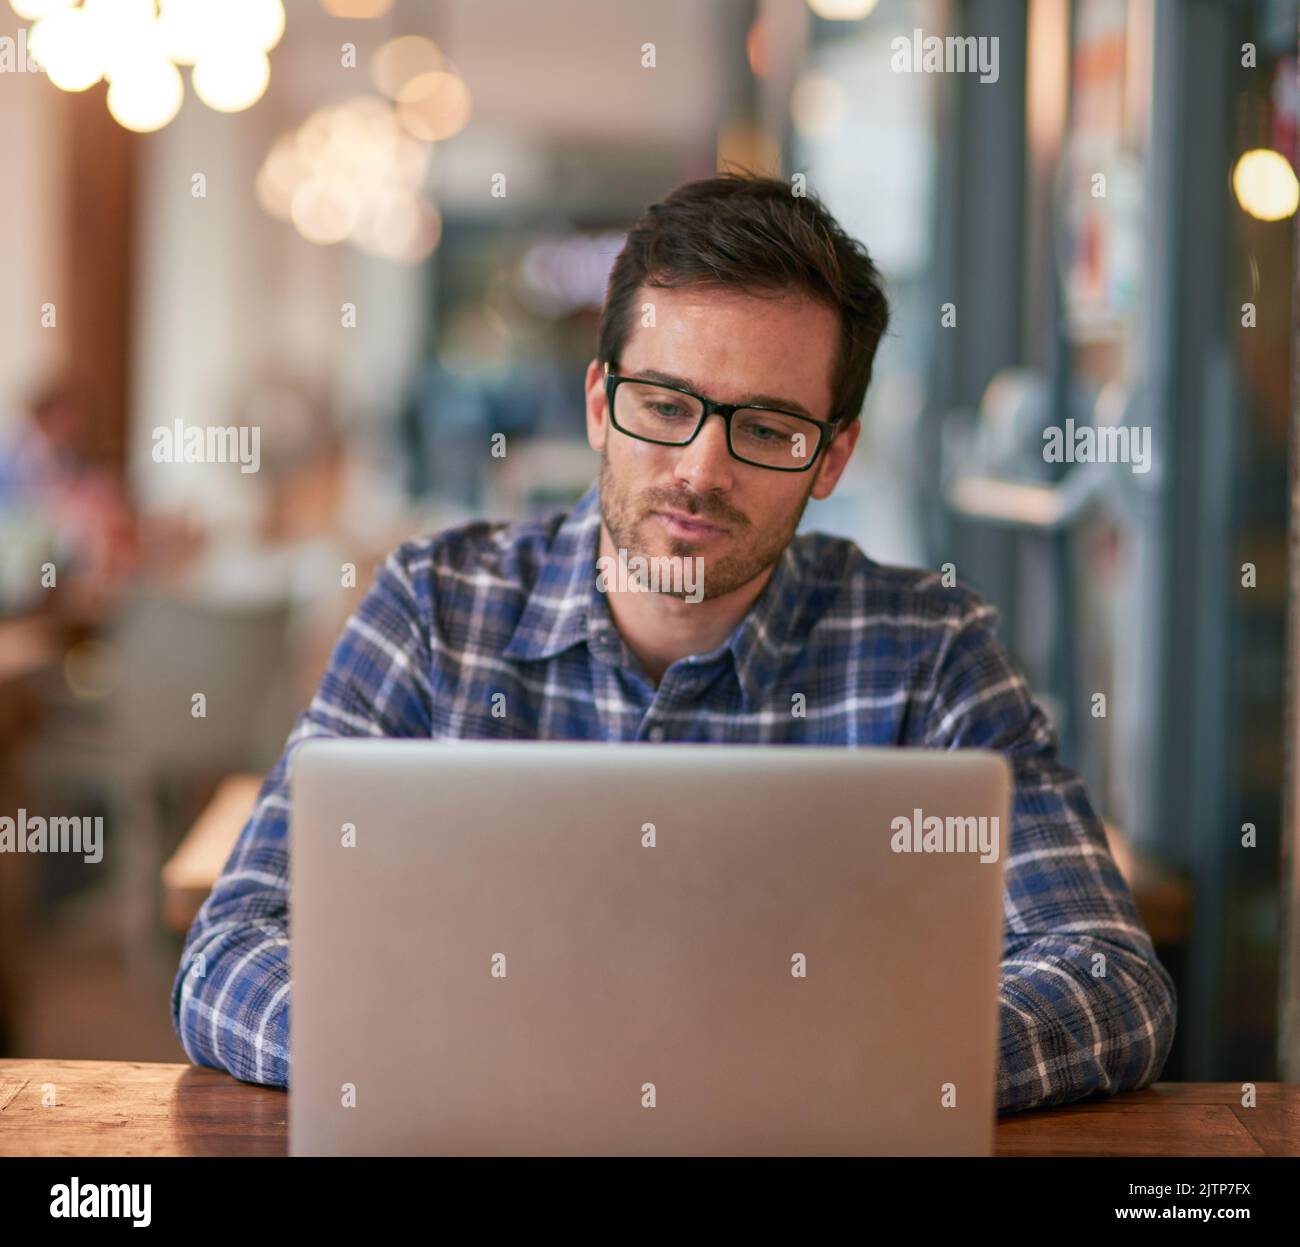 Free wifi available here - bring your laptop. a young man using his laptop while sitting in a coffee shop. Stock Photo